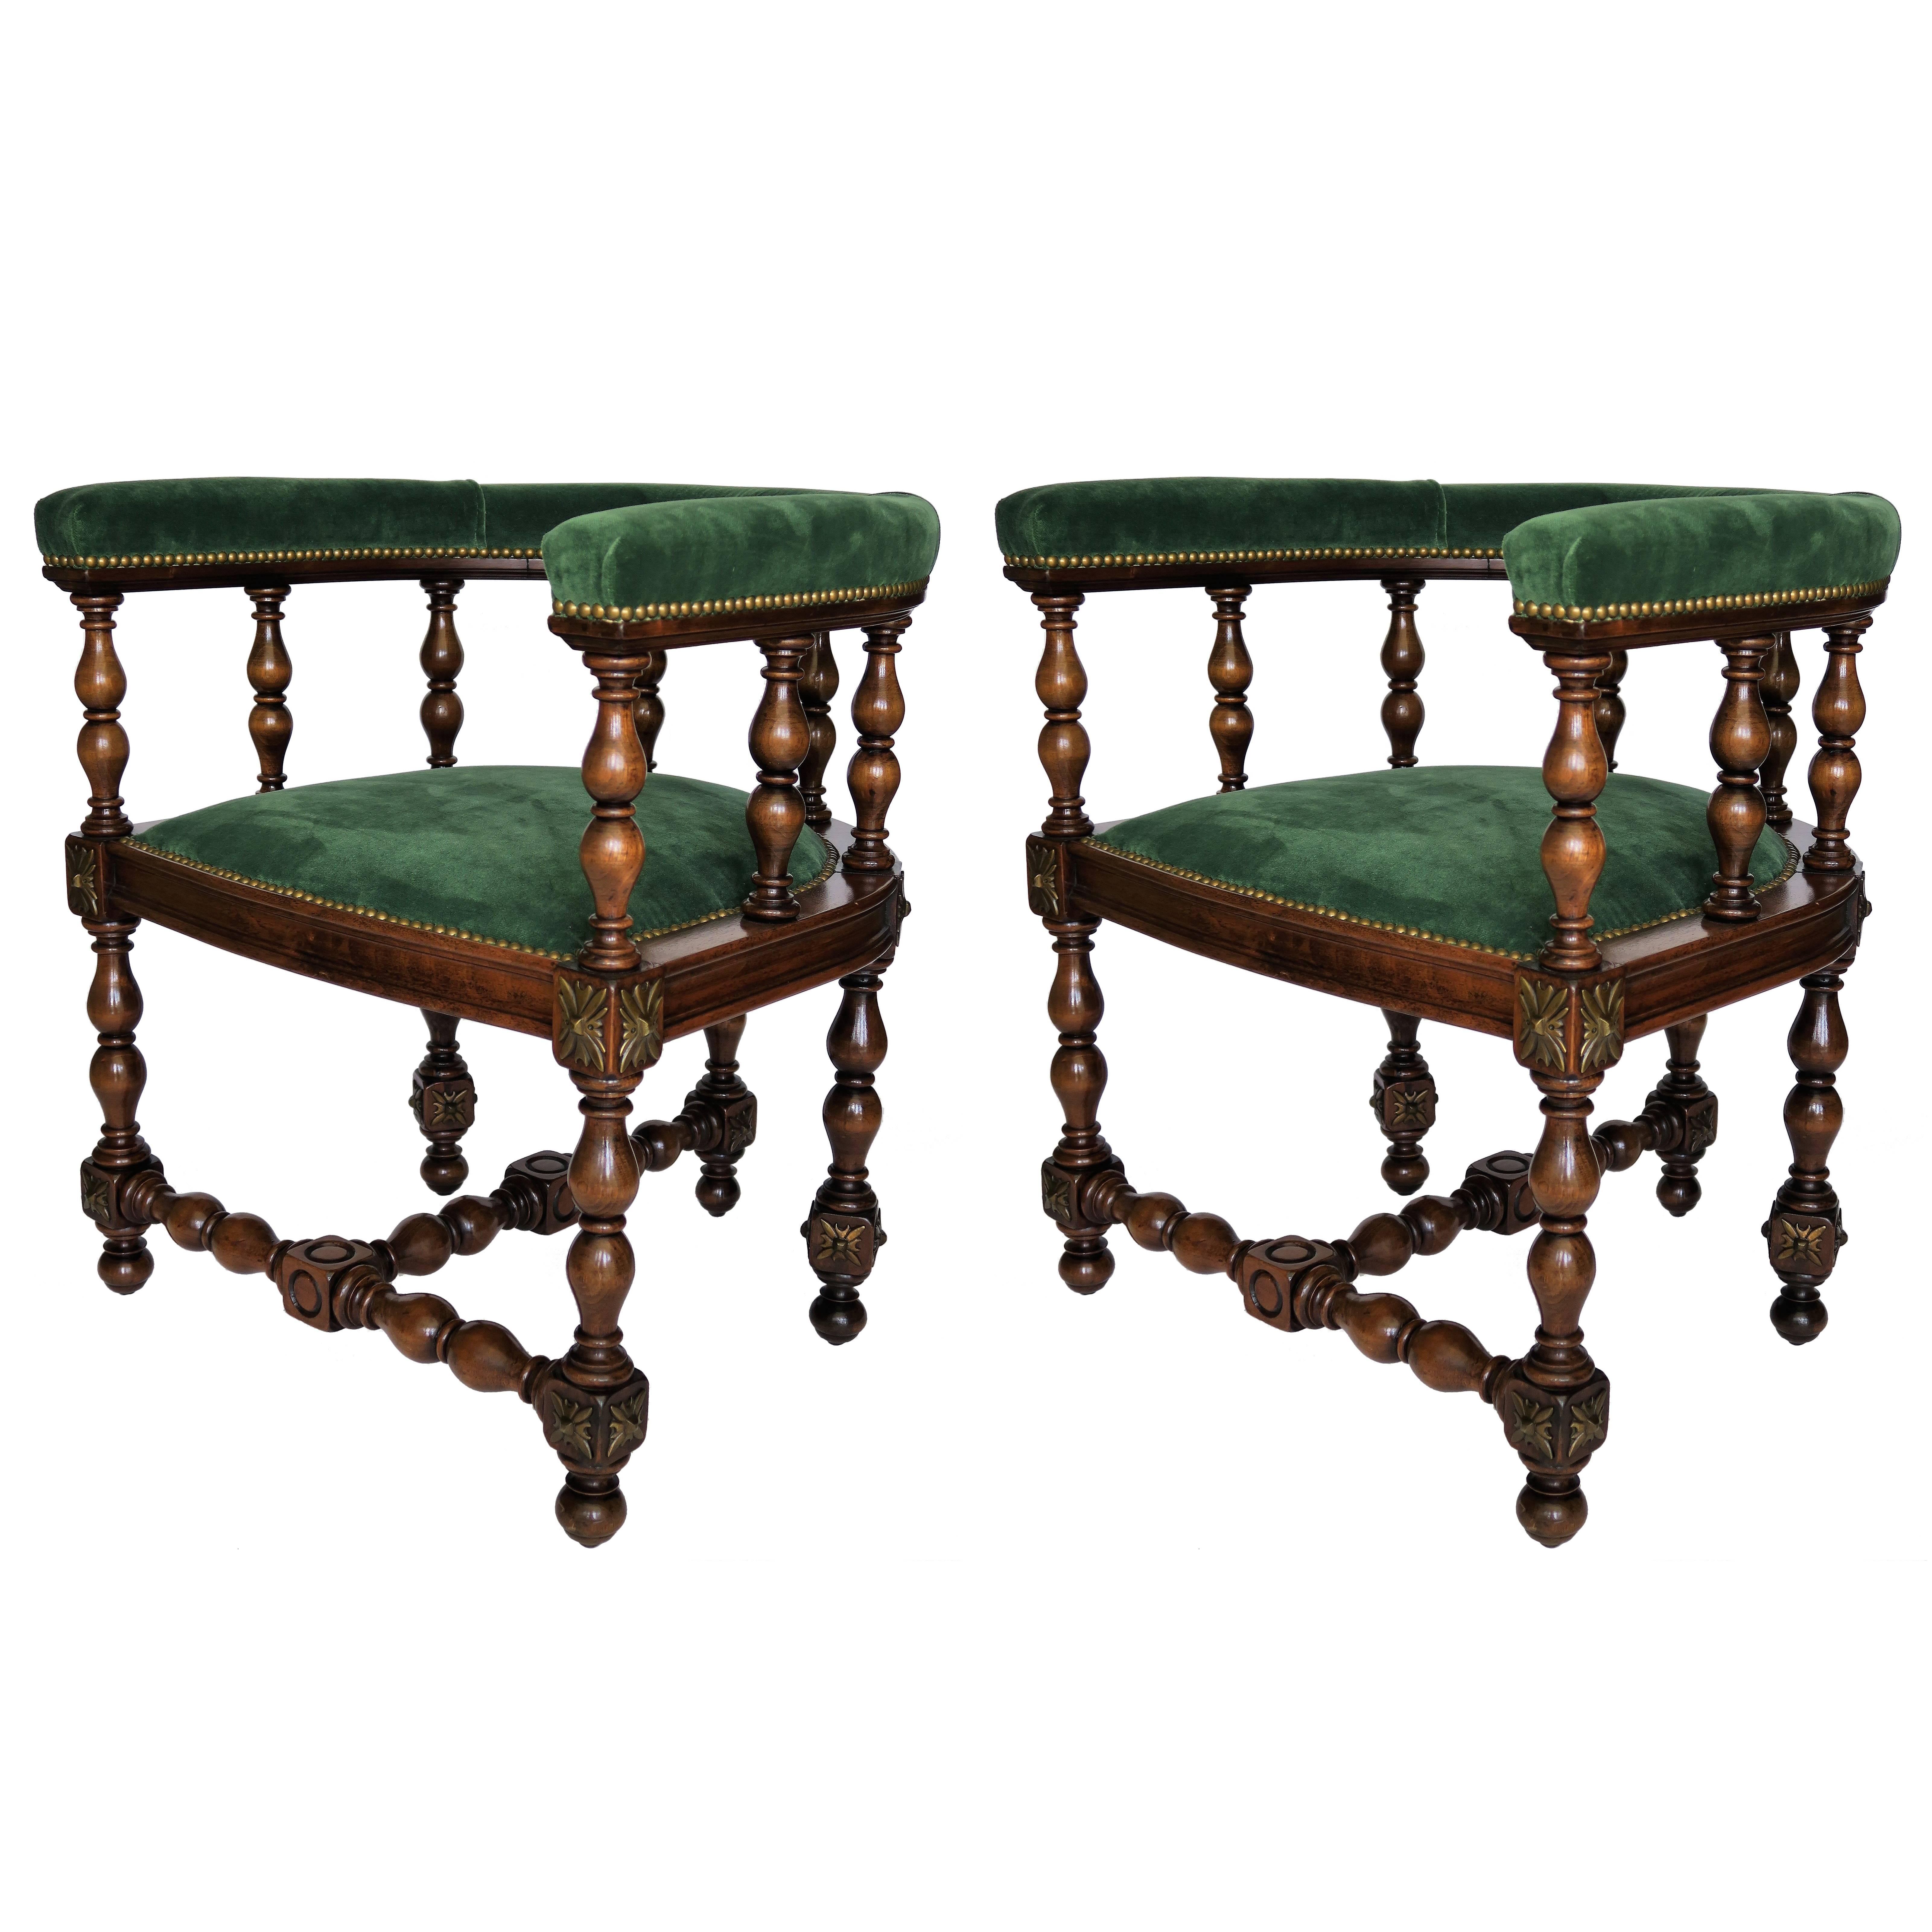 Pair of Barrel Back Jacobean Style Library Chairs with Emerald Green Velvet